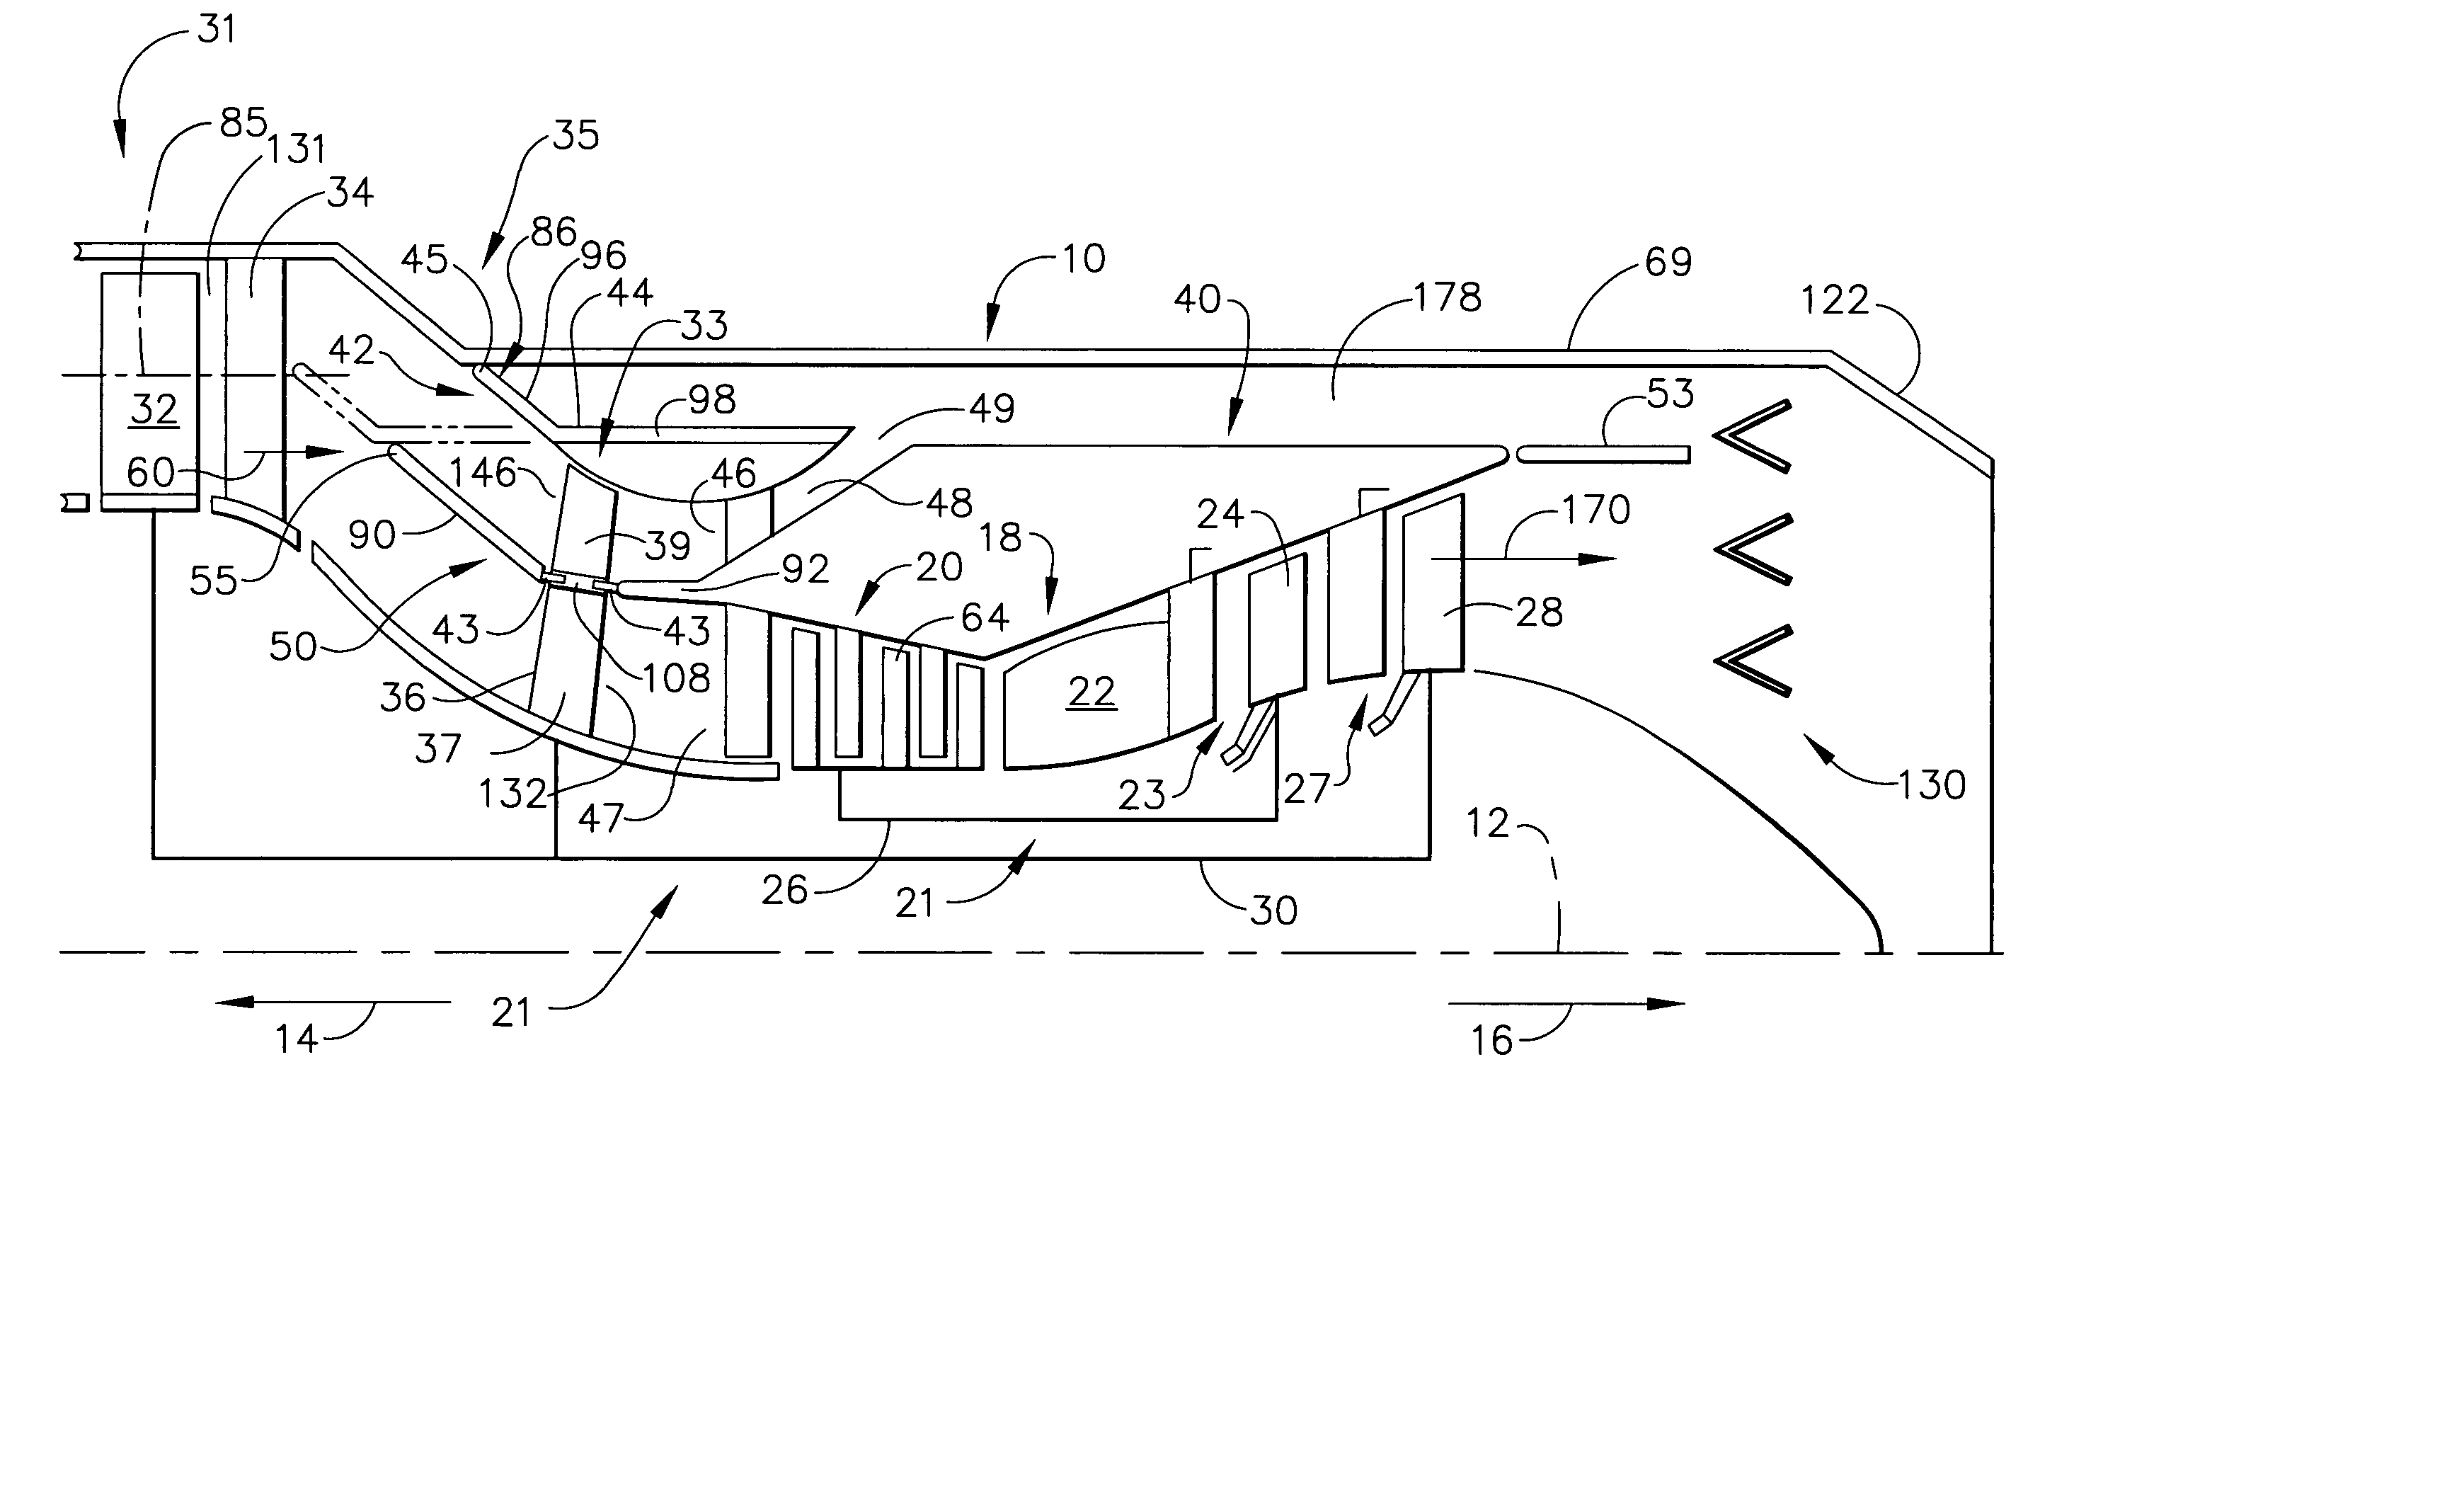 Gas turbine engine with variable pressure ratio fan system